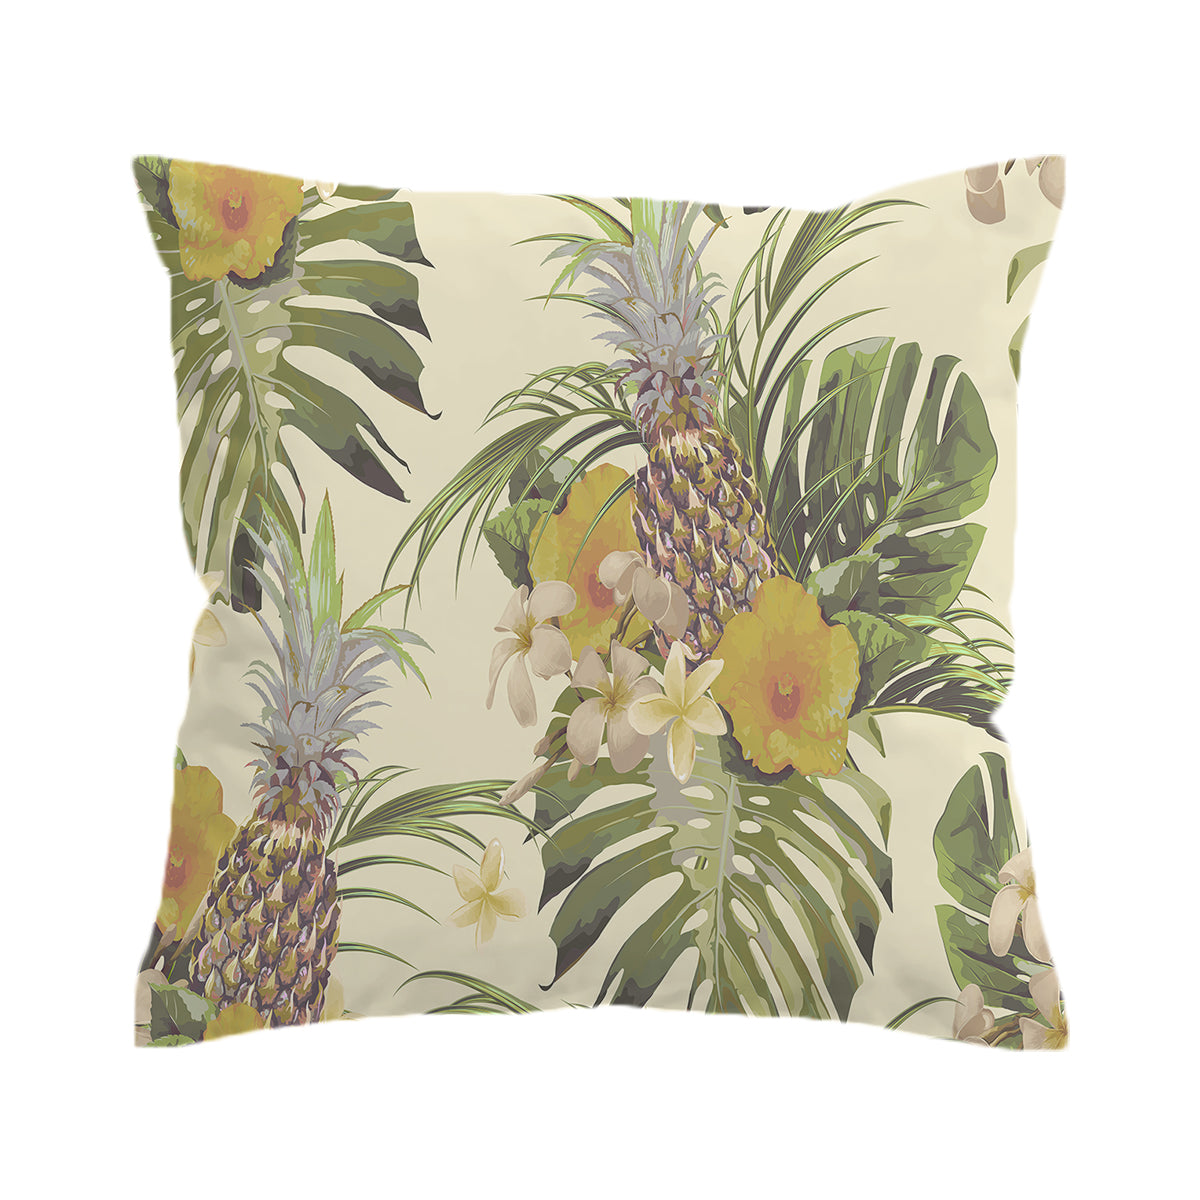 The Tropicalist Pillow Cover